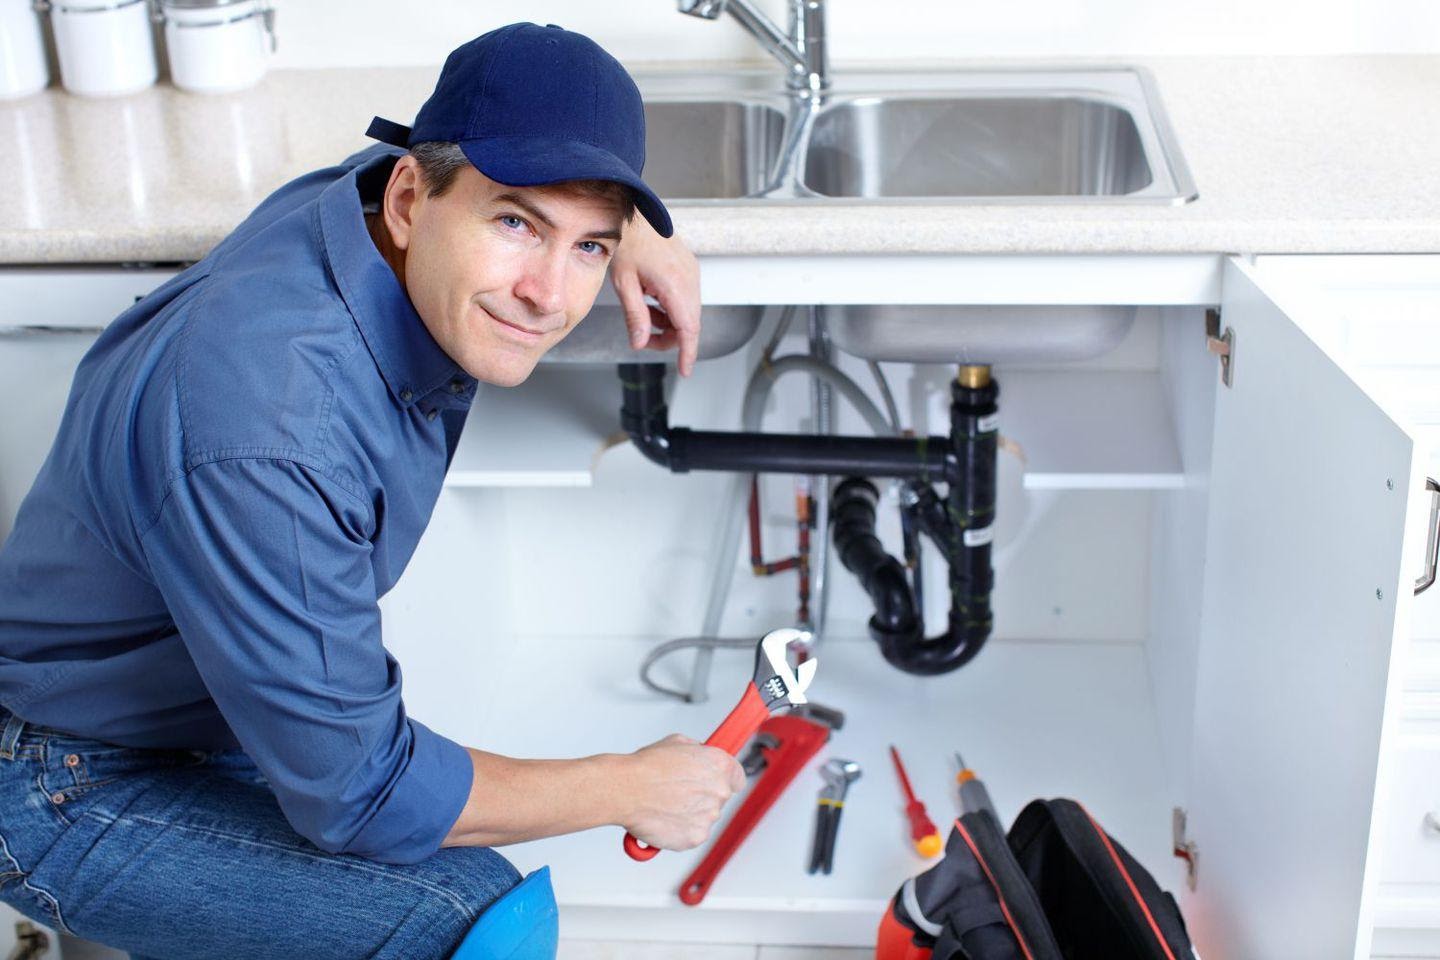 How To Find a Trusted Plumber